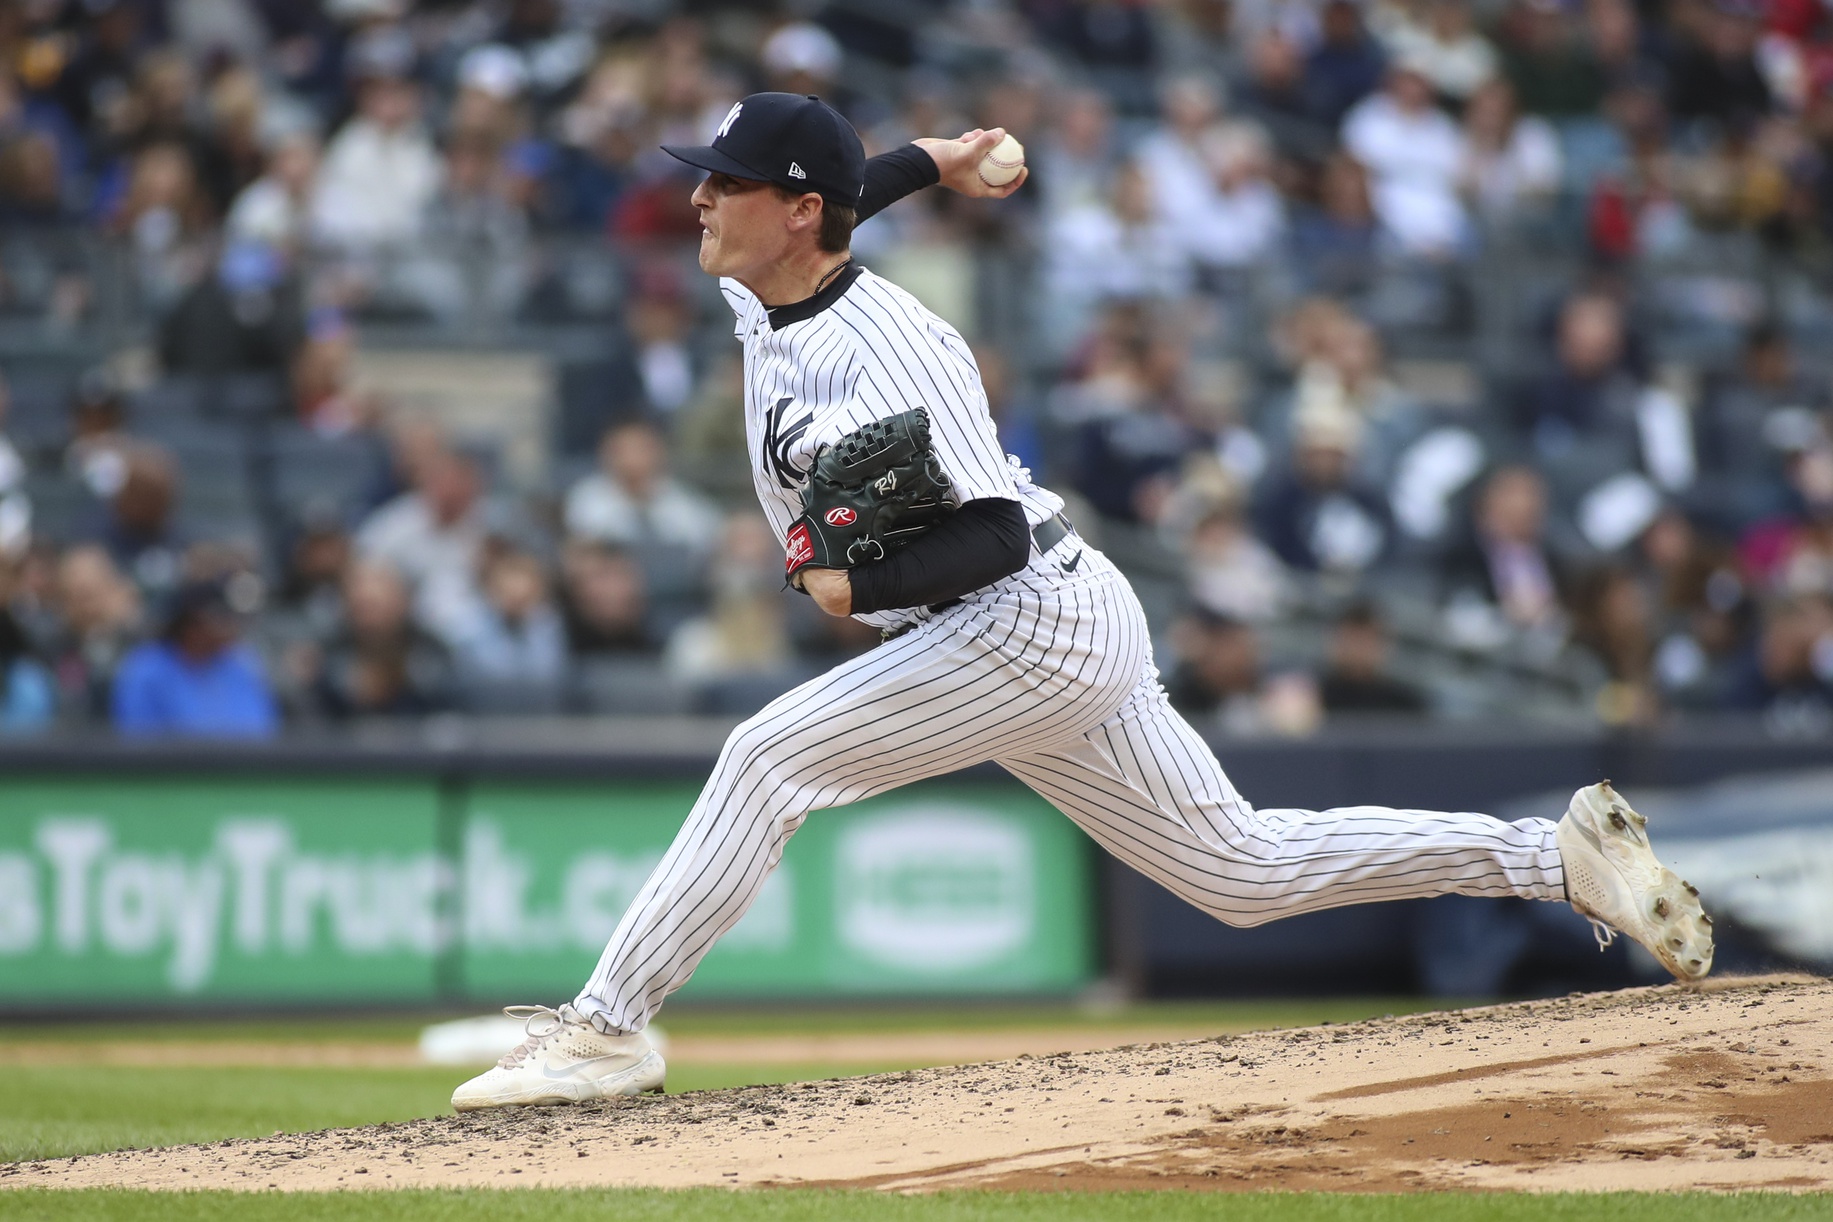 Ron Marinaccio shows poise in back end of bullpen - Pinstriped